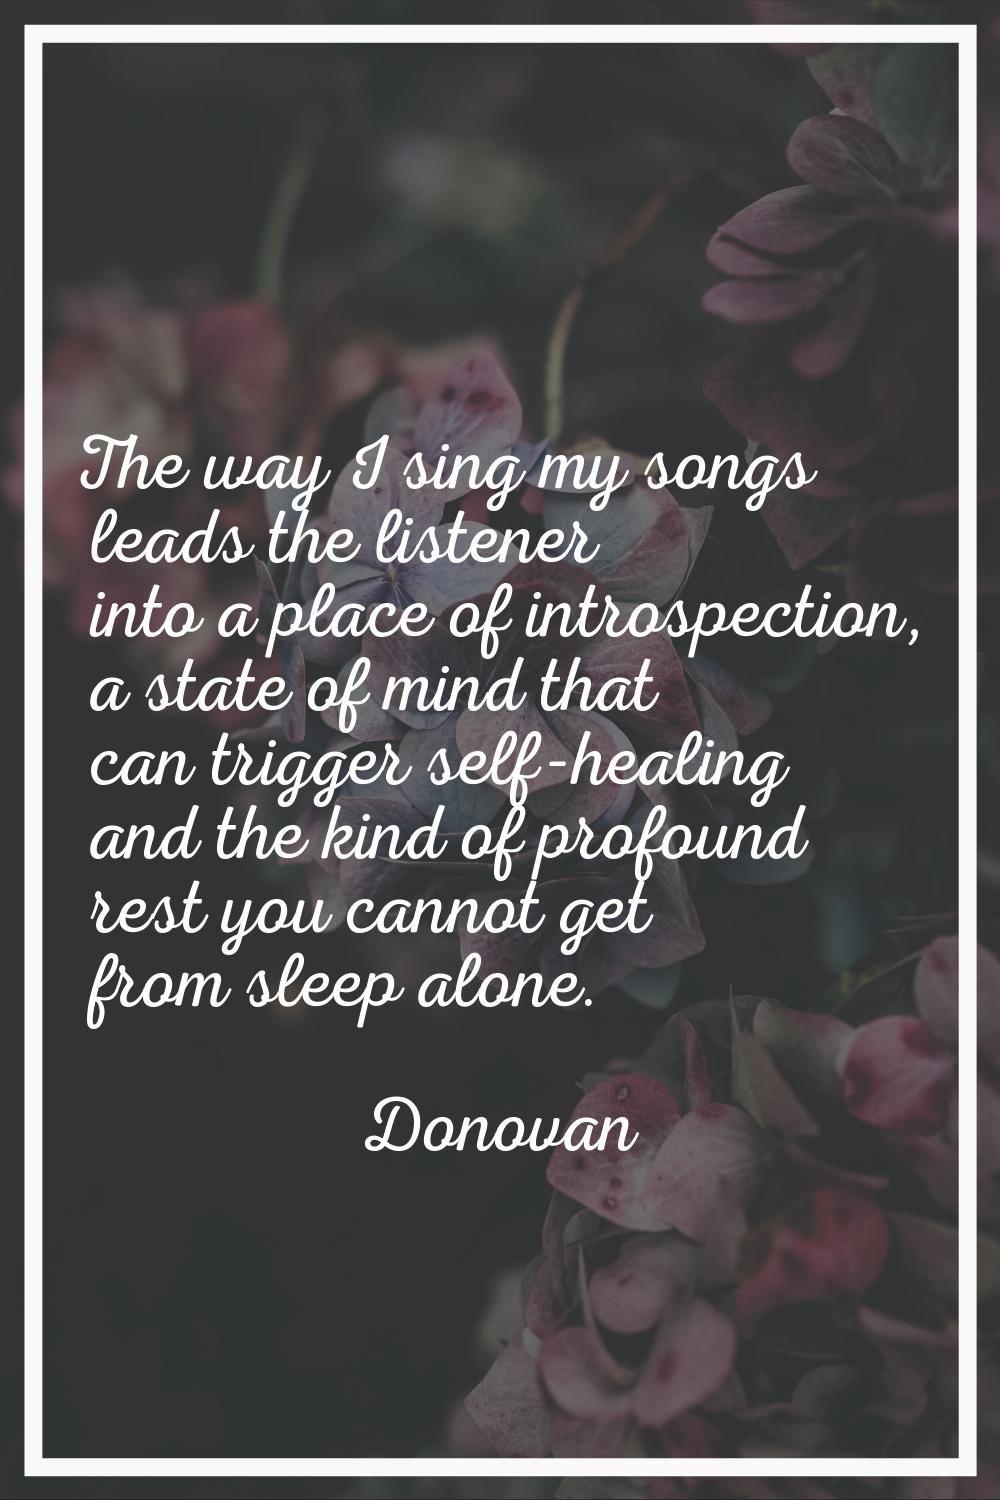 The way I sing my songs leads the listener into a place of introspection, a state of mind that can 